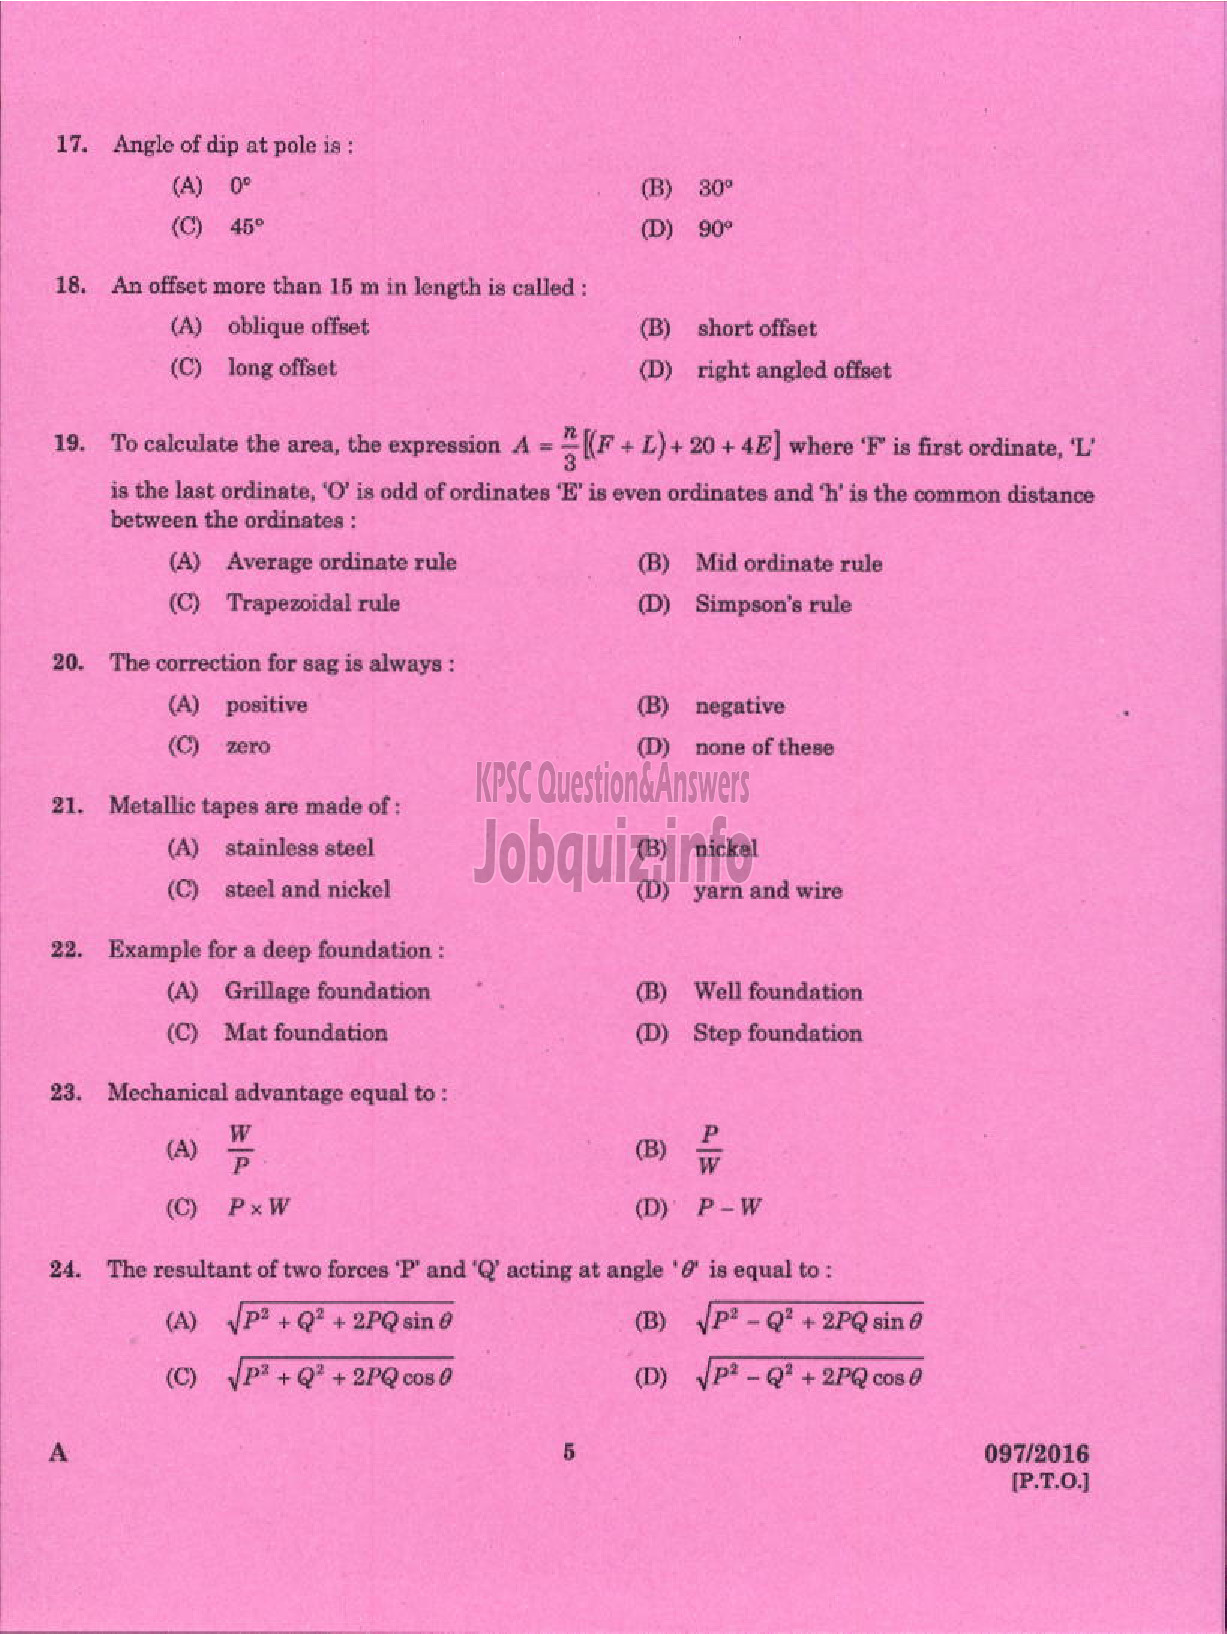 Kerala PSC Question Paper - DRAUGHTSMAN GR II SURVEY AND LAND RECORDS-3